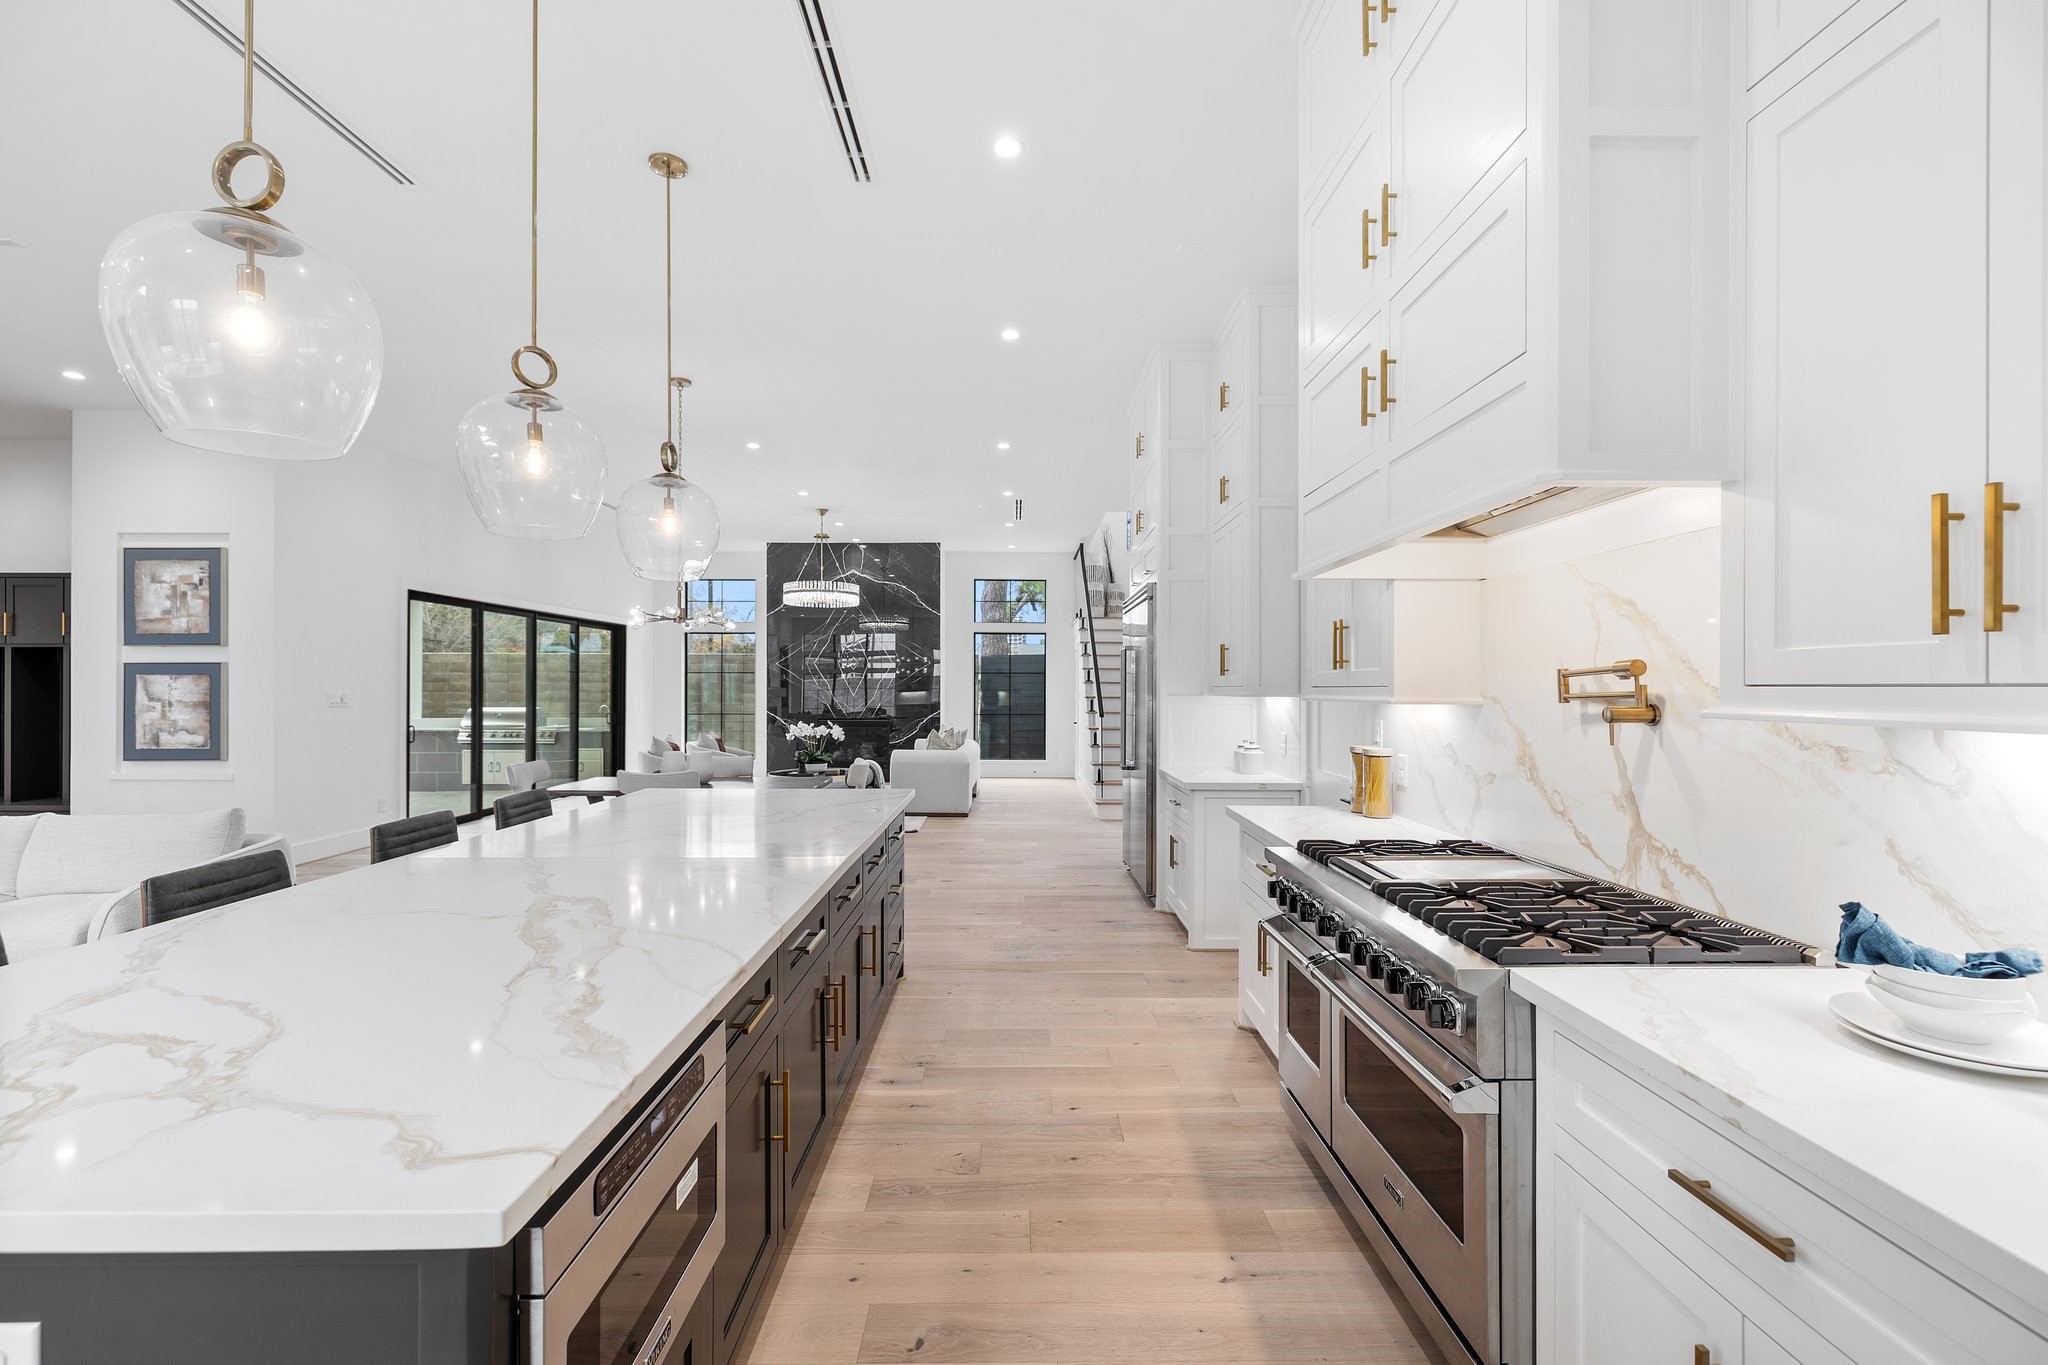 Illuminate your culinary adventures with the soft glow of pendant lights above the island, adding a touch of sophistication. Practicality meets style with under cabinet lighting, ensuring a well-lit workspace for all your cooking endeavors.